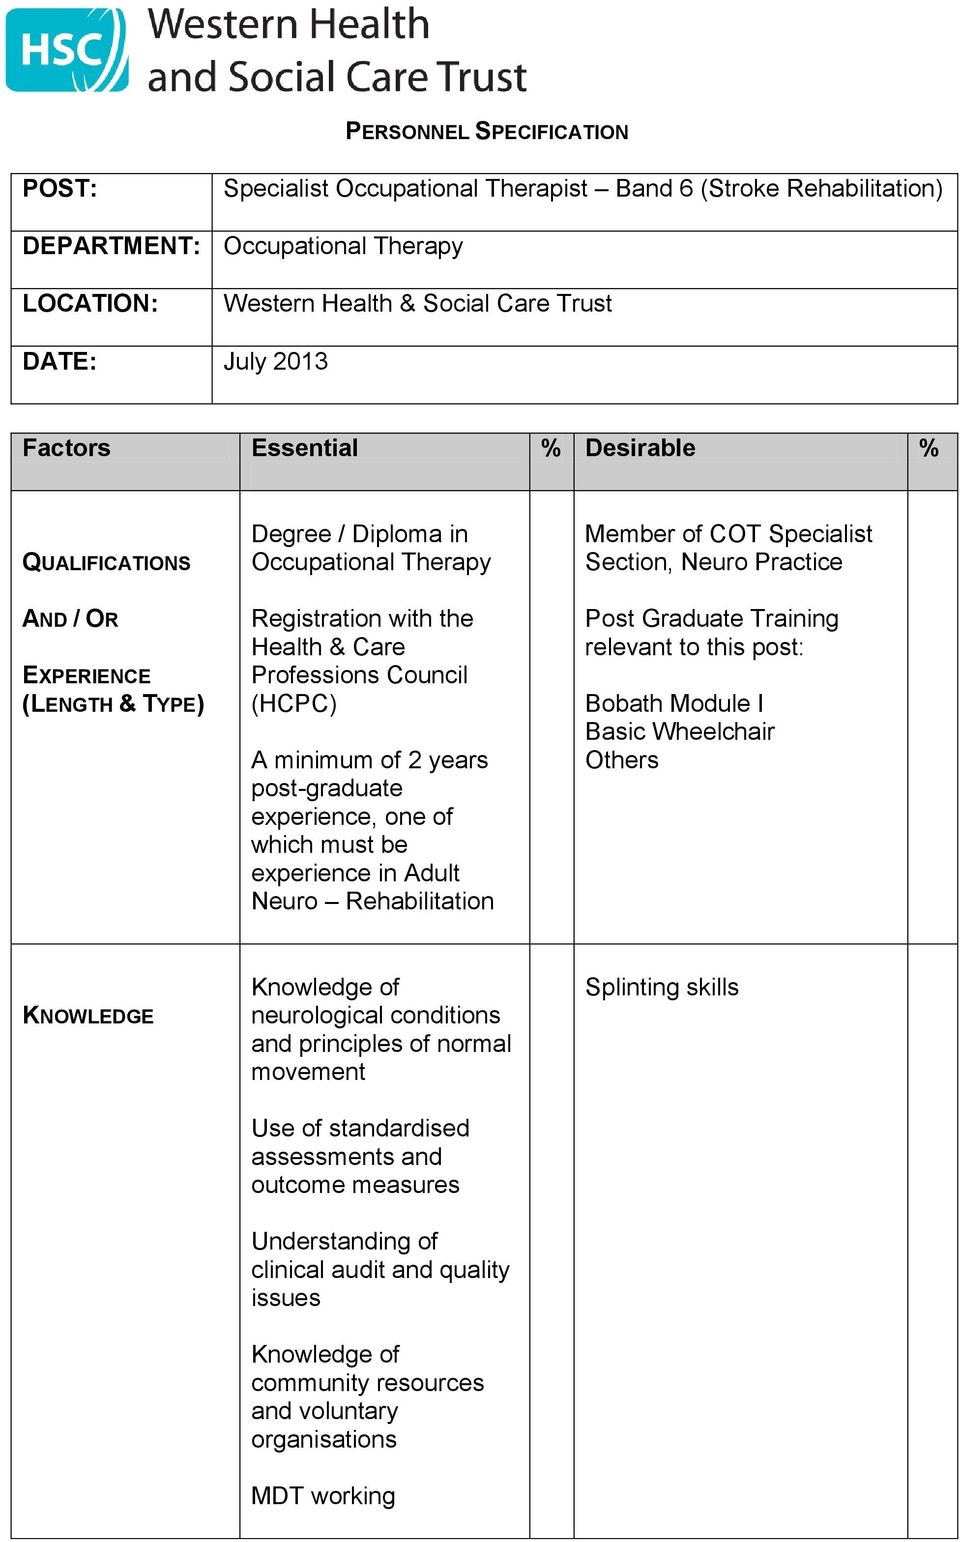 post-graduate experience, one of which must be experience in Adult Neuro Rehabilitation Member of COT Specialist Section, Neuro Practice Post Graduate Training relevant to this post: Bobath Module I